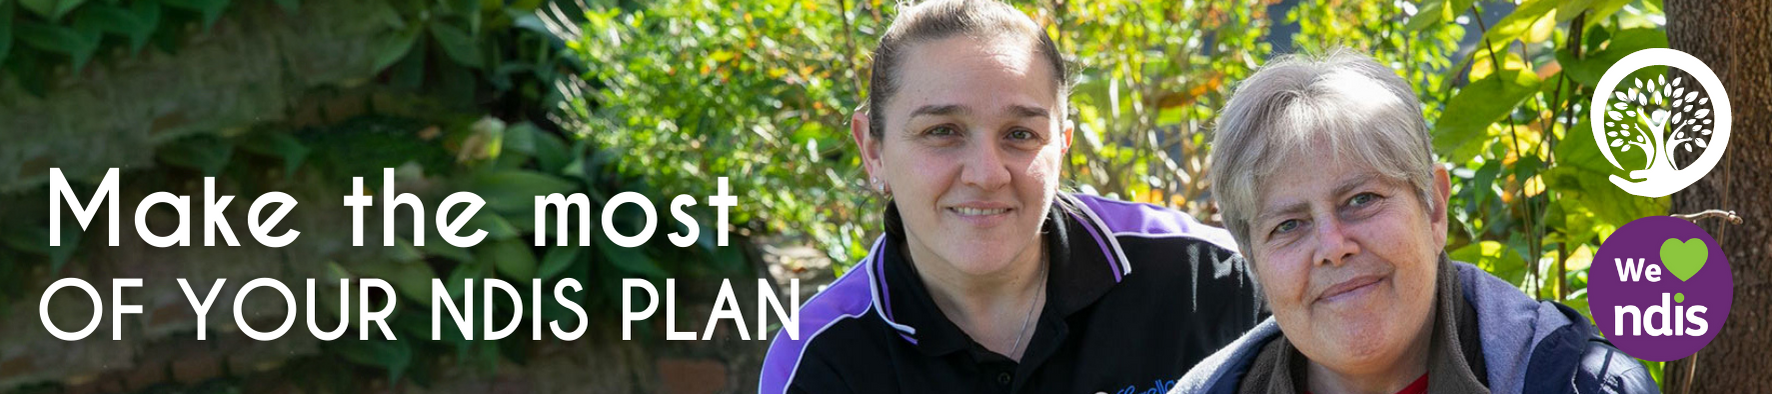 Make the Most of your NDIS Plan banner with We Heart NDIS Logo